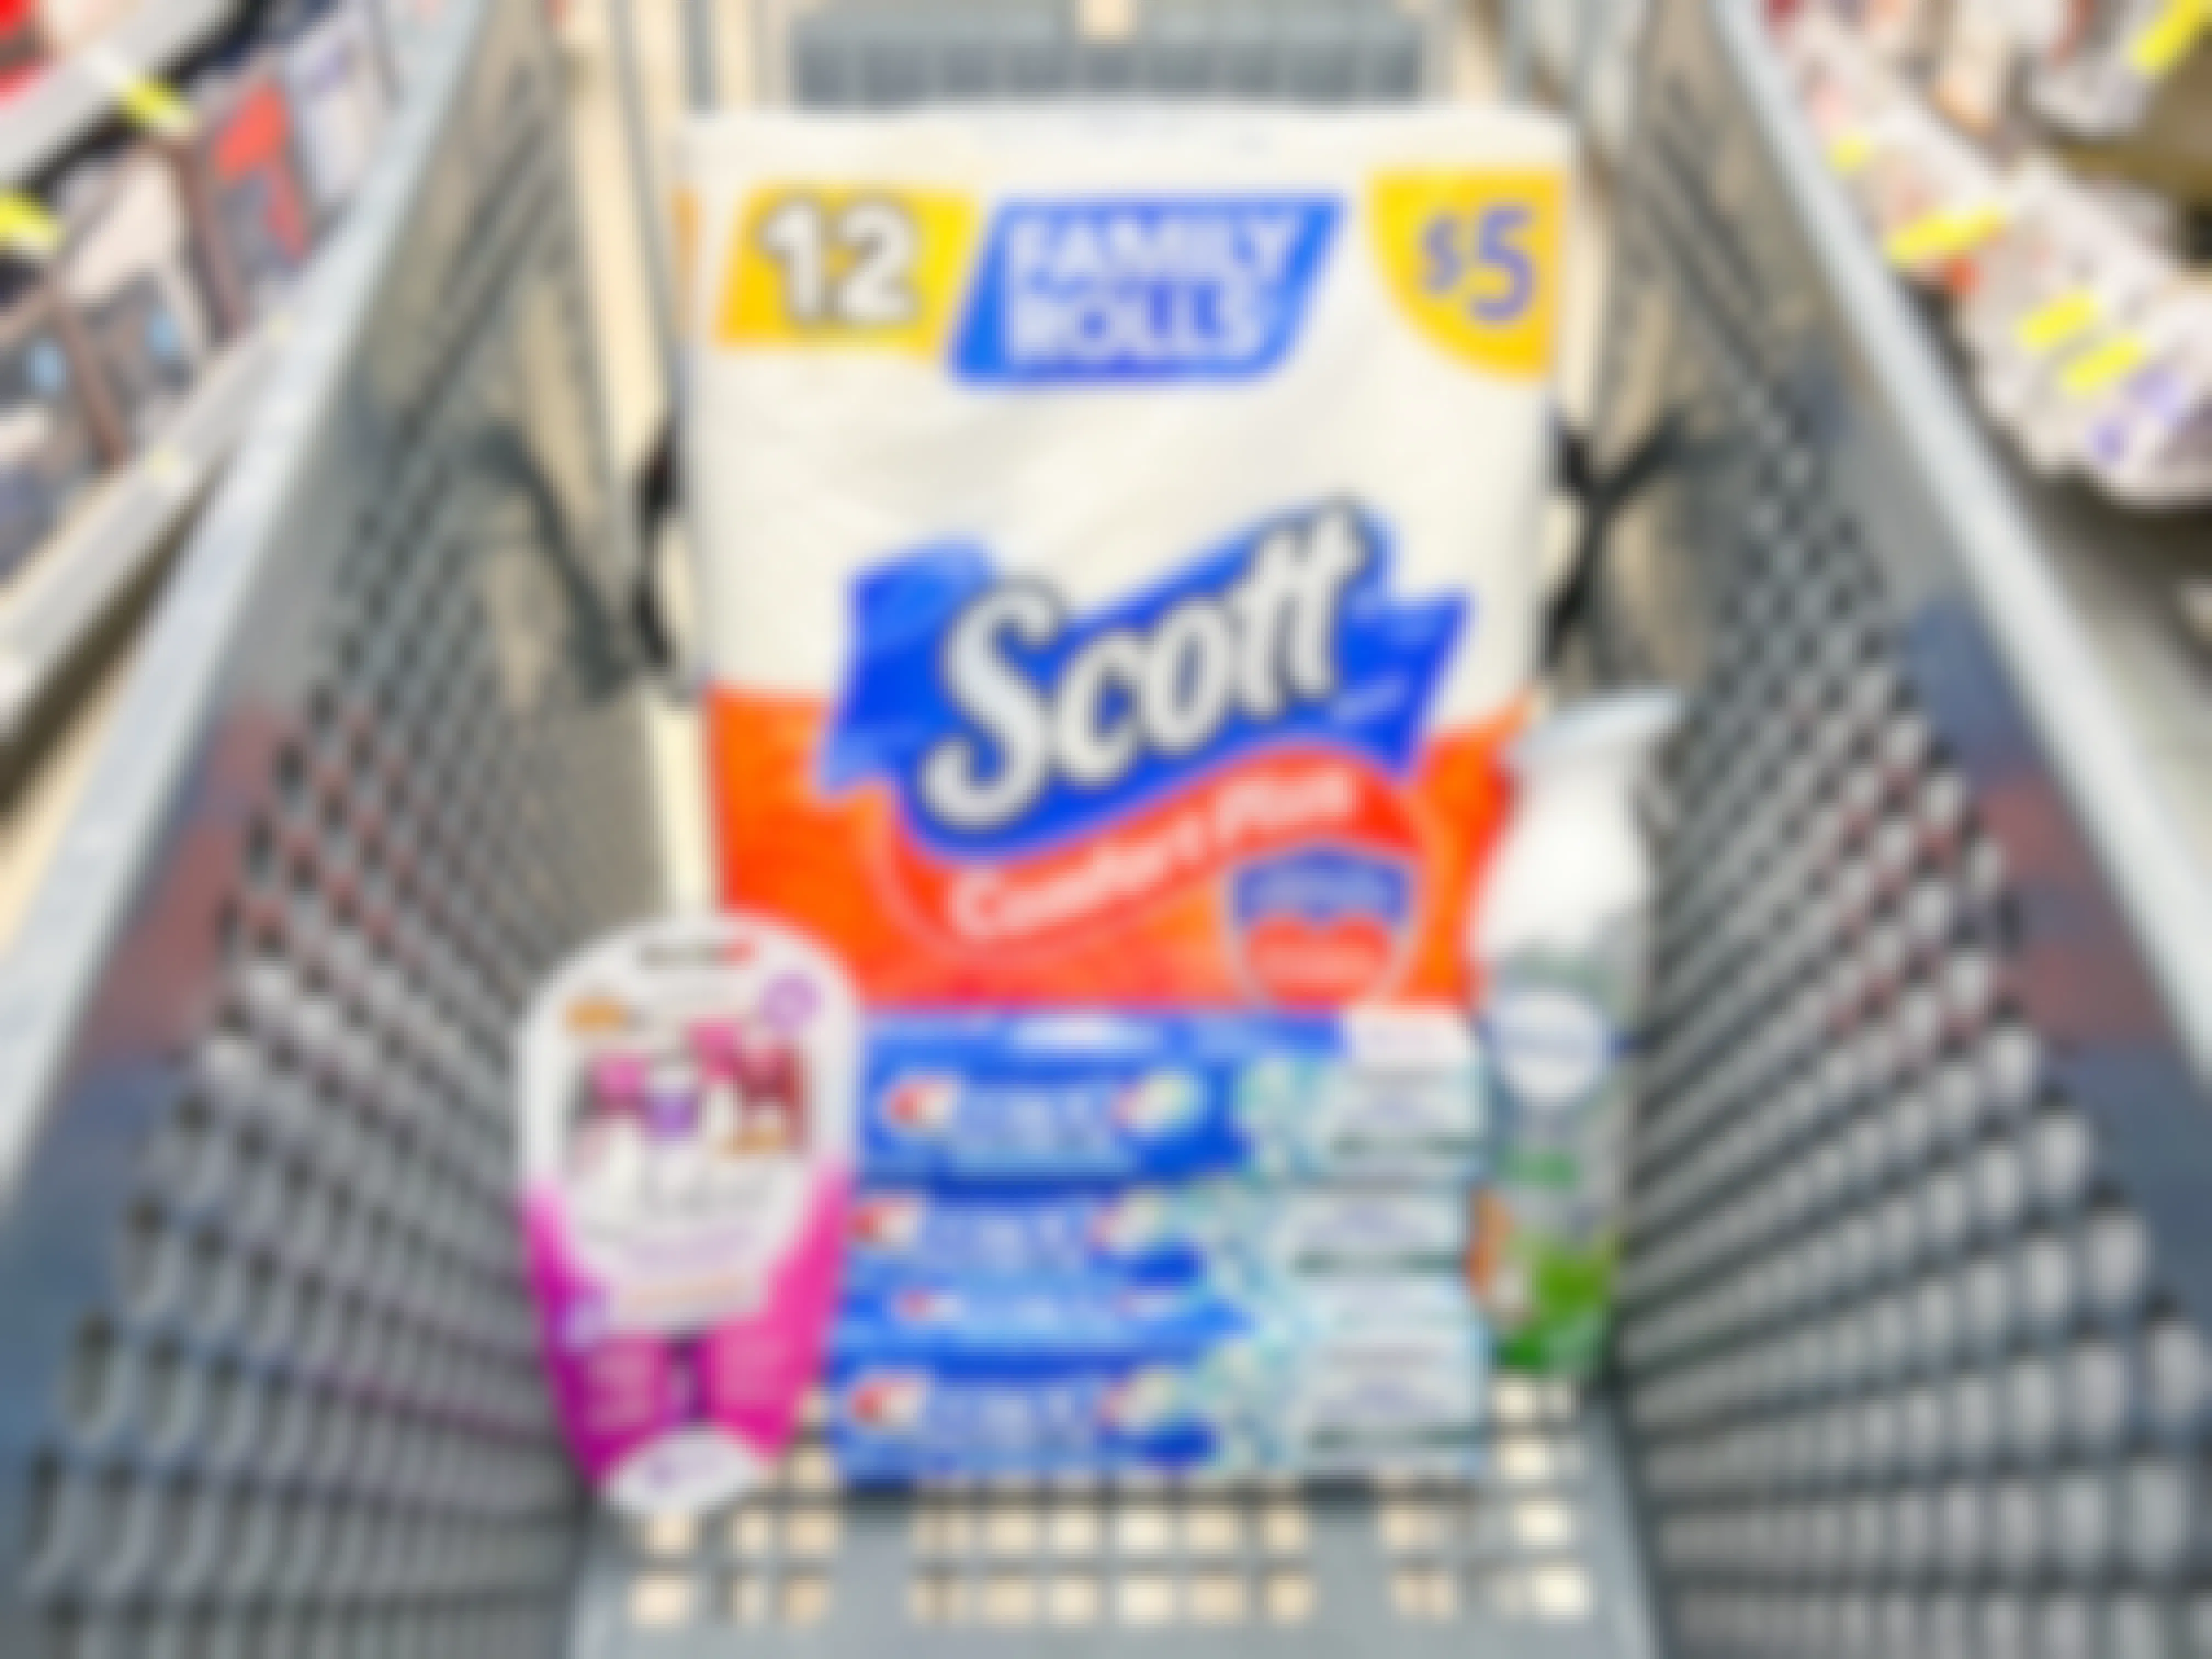 walgreens shopping cart with crest toothpaste, scott toilet paper, febreze, and bic razors